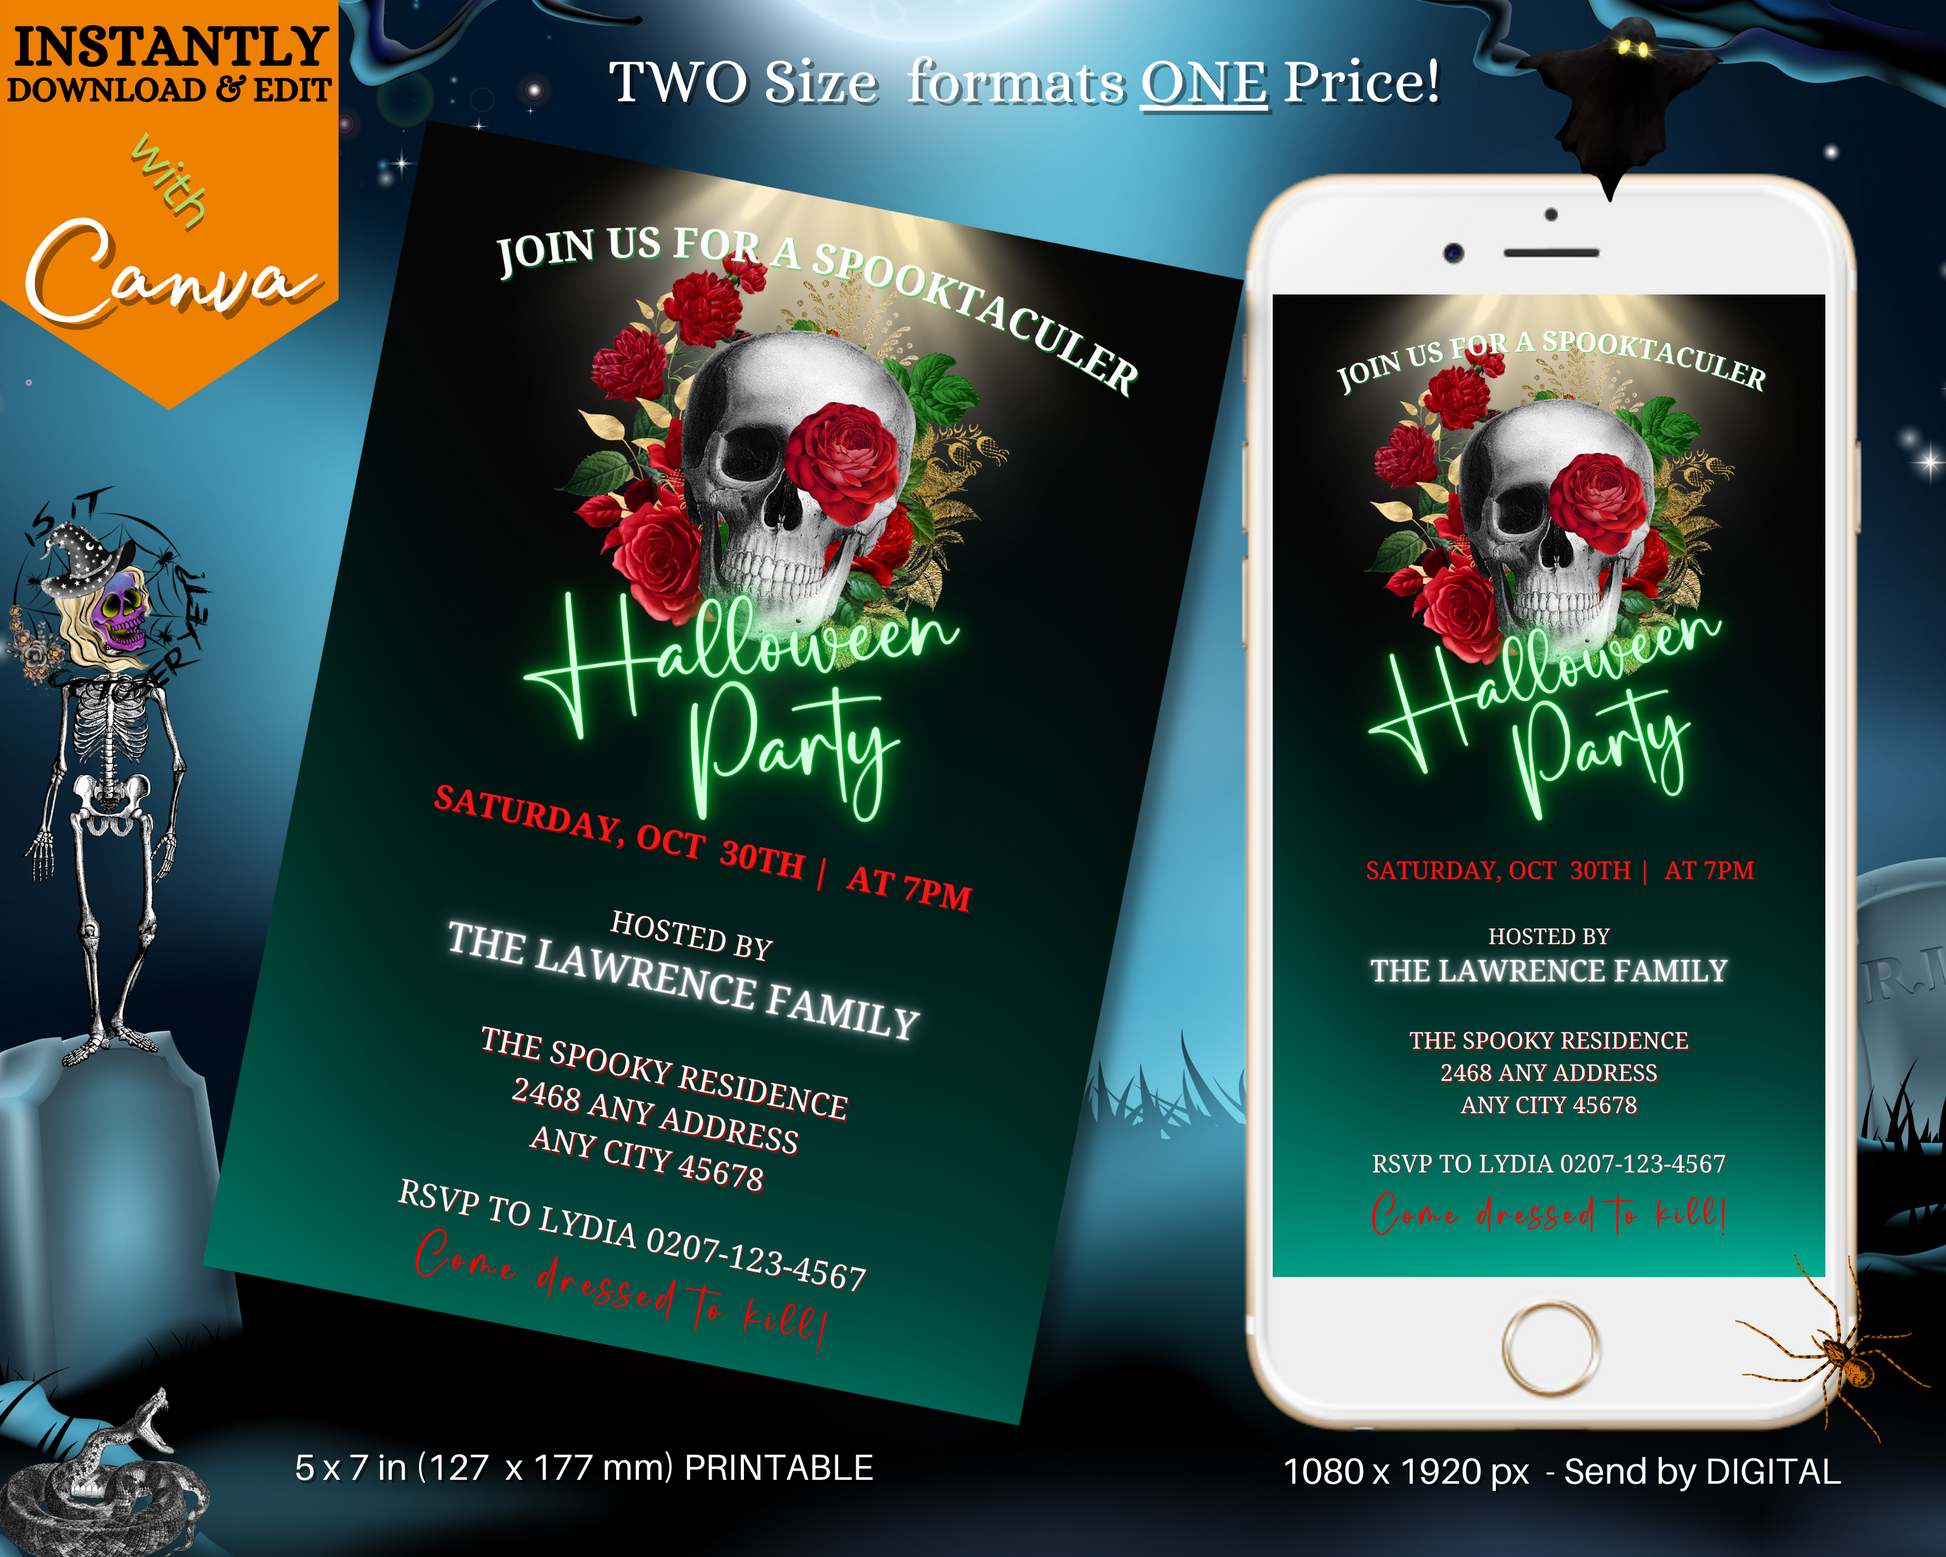 Red Rose Illuminated Skull | Halloween Evite - Customizable digital invitation with a skull and roses design, editable via Canva on mobile or PC.